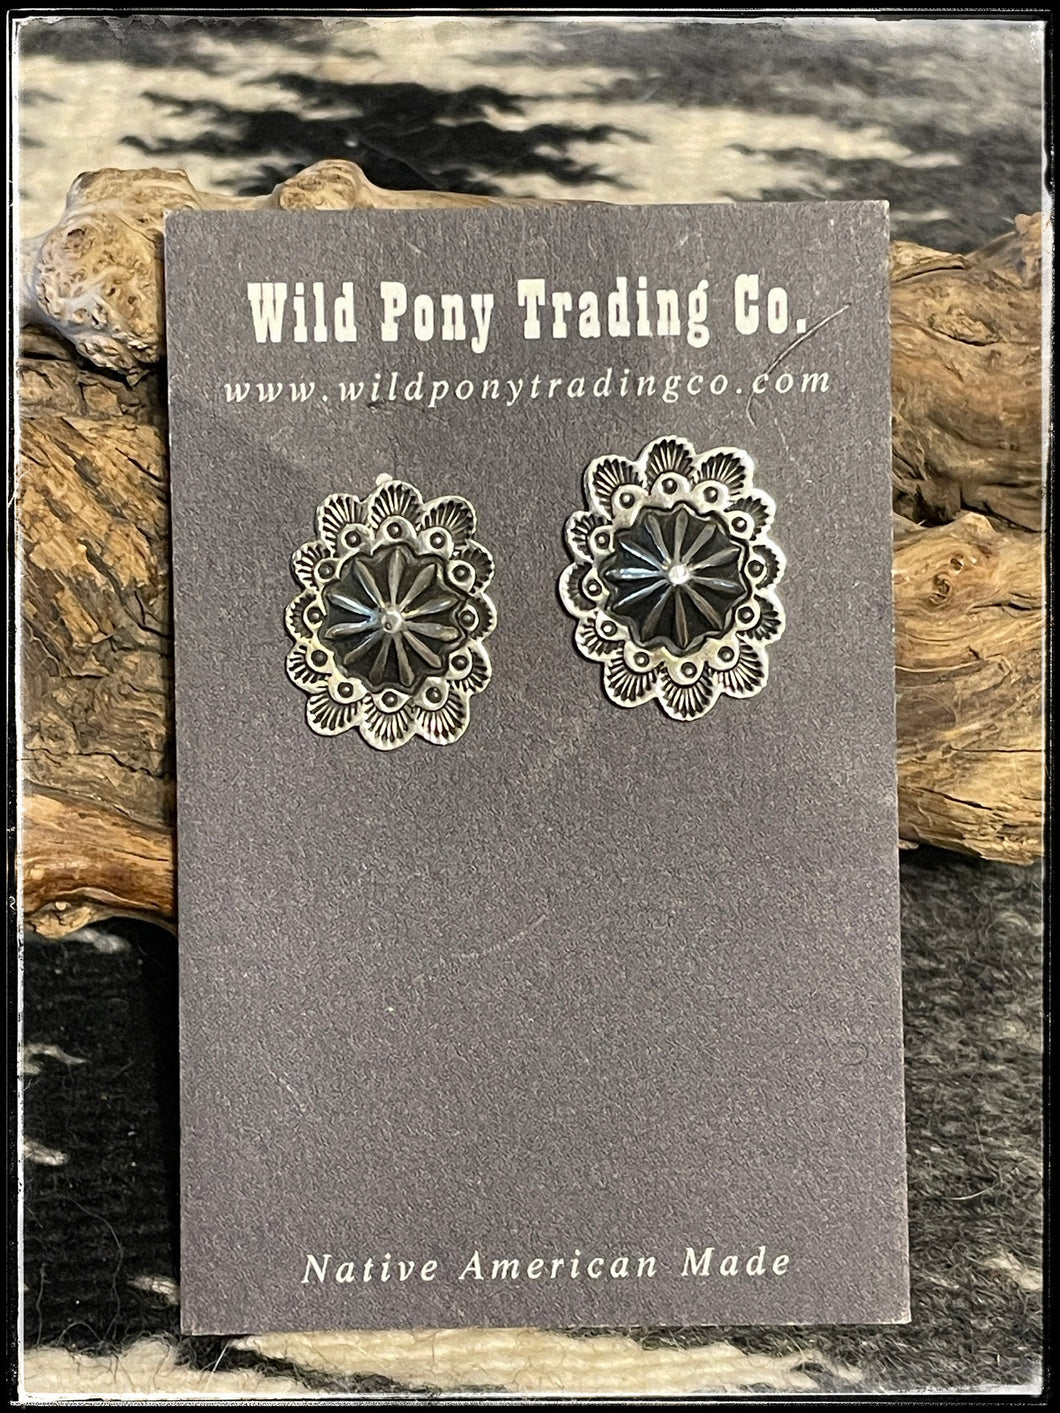 Roland Dixon, sterling silver, concho style earrings. Navajo made.